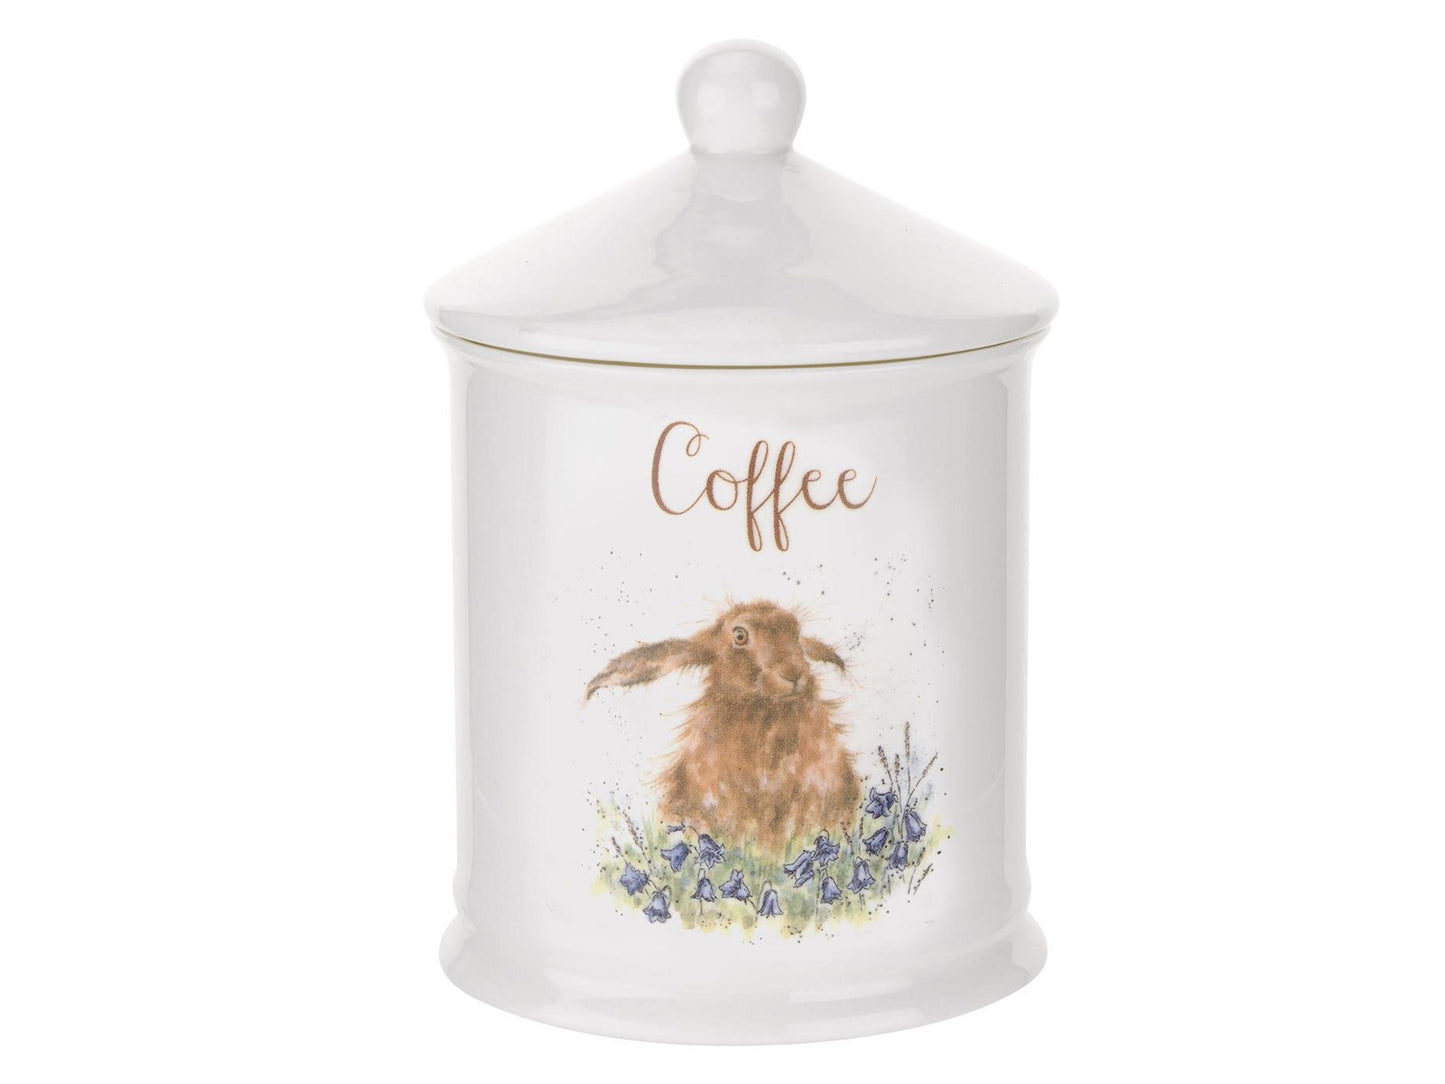 This Coffee Canister is decorated with a cute intricate Hare. With its beautiful simplistic design, it’s a perfect gift for any animal lover. Size: 10cm Diameter 14.5cm Height - 4" Diameter 5.75" Height. By: Wrendale. Product Code: WNC3996-XW.